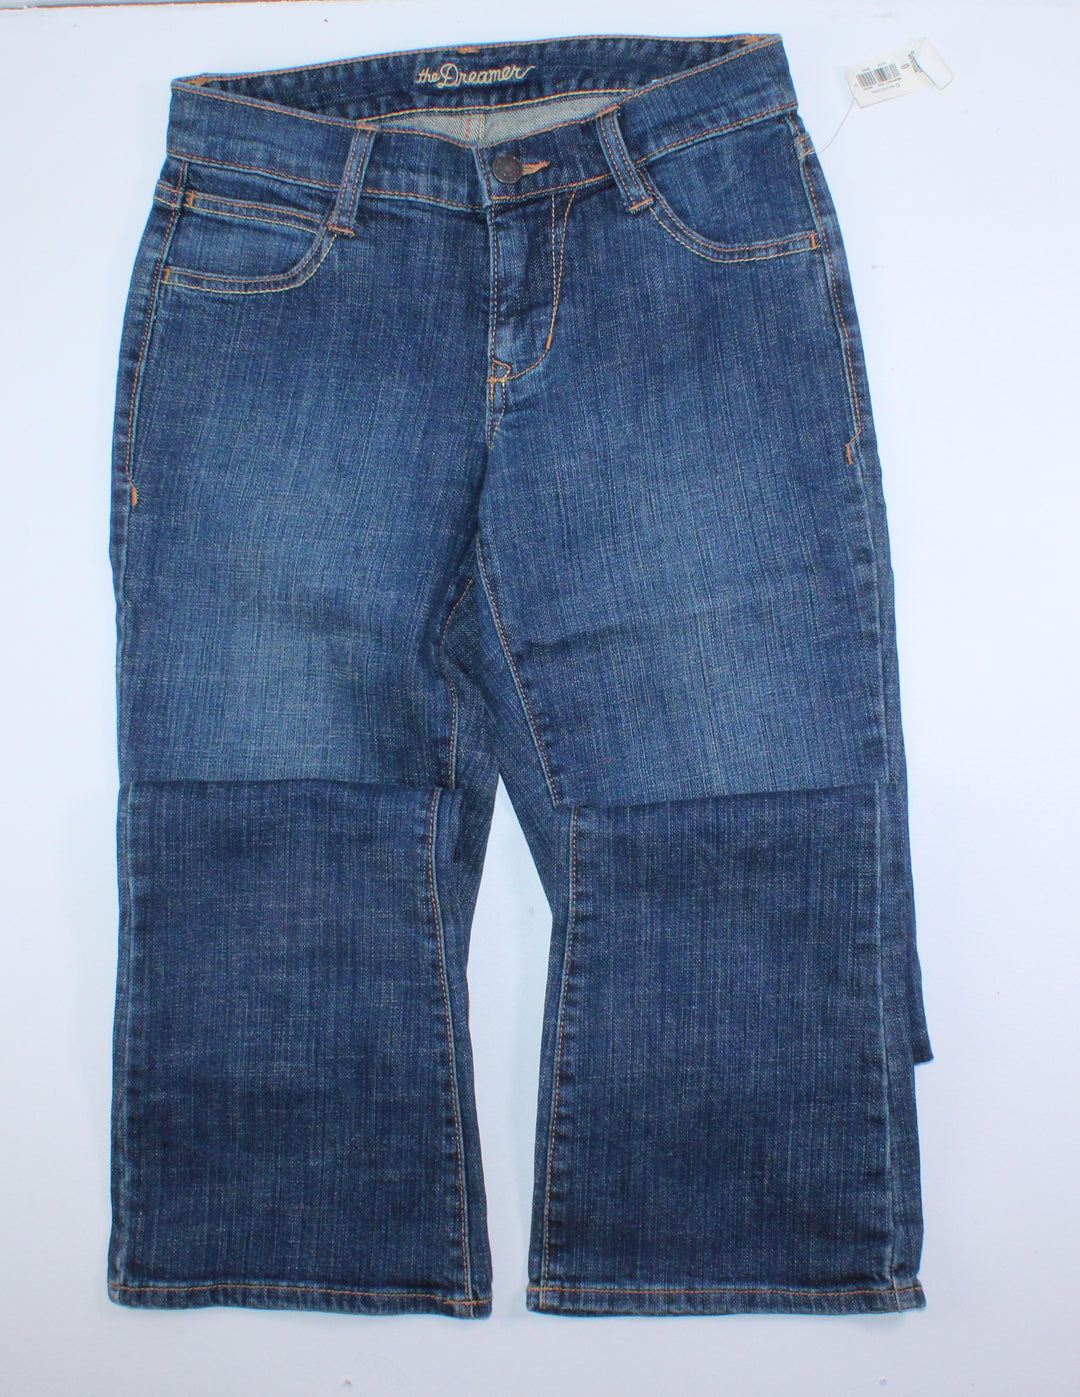 OLD NAVY THE DREAMER BOOTCUT JEANS LADIES 0 NWT